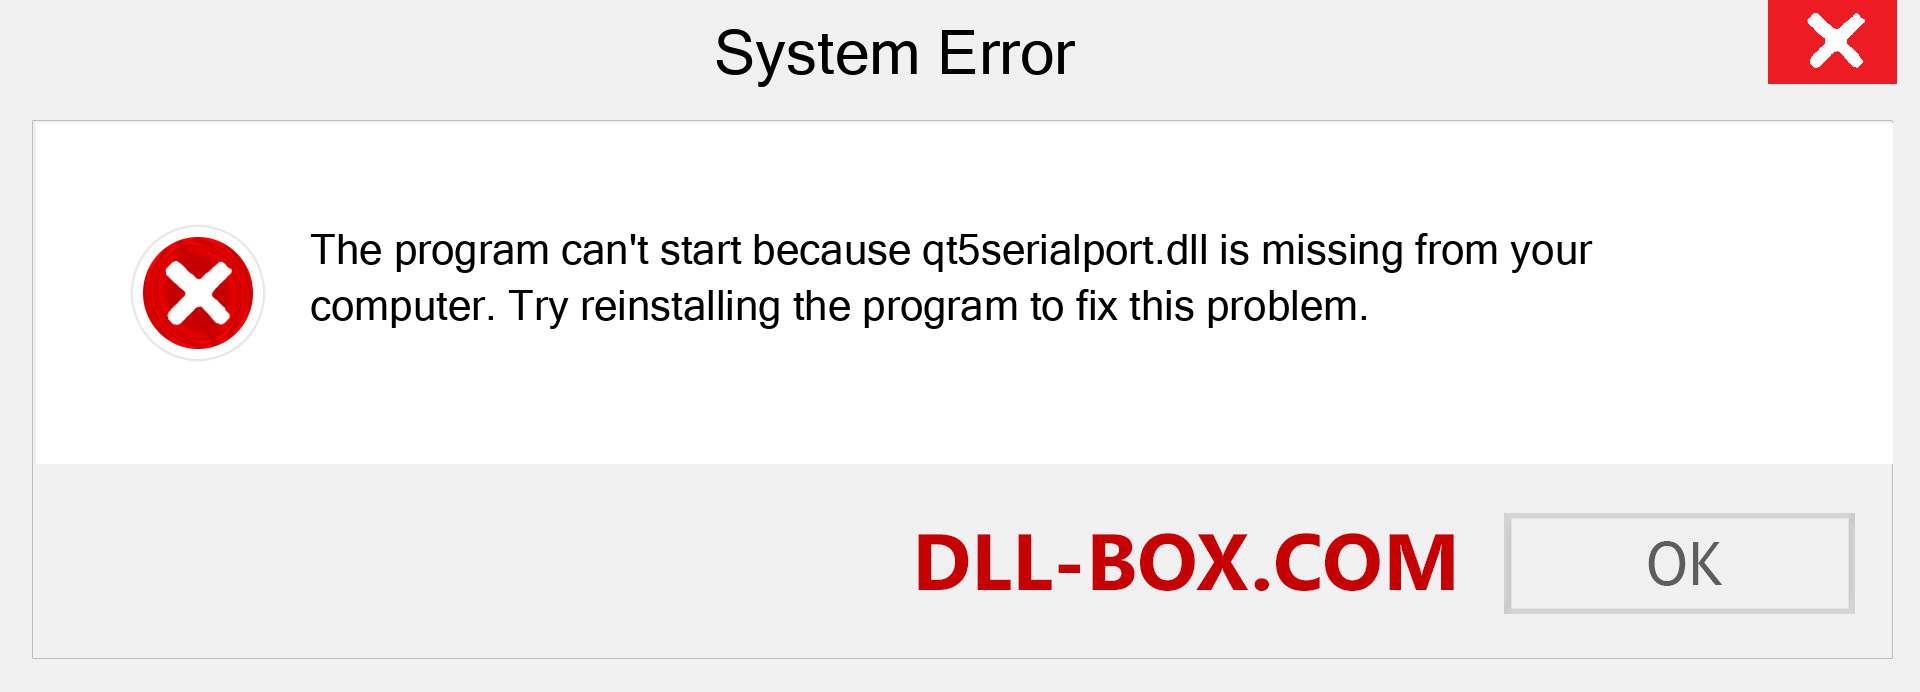  qt5serialport.dll file is missing?. Download for Windows 7, 8, 10 - Fix  qt5serialport dll Missing Error on Windows, photos, images